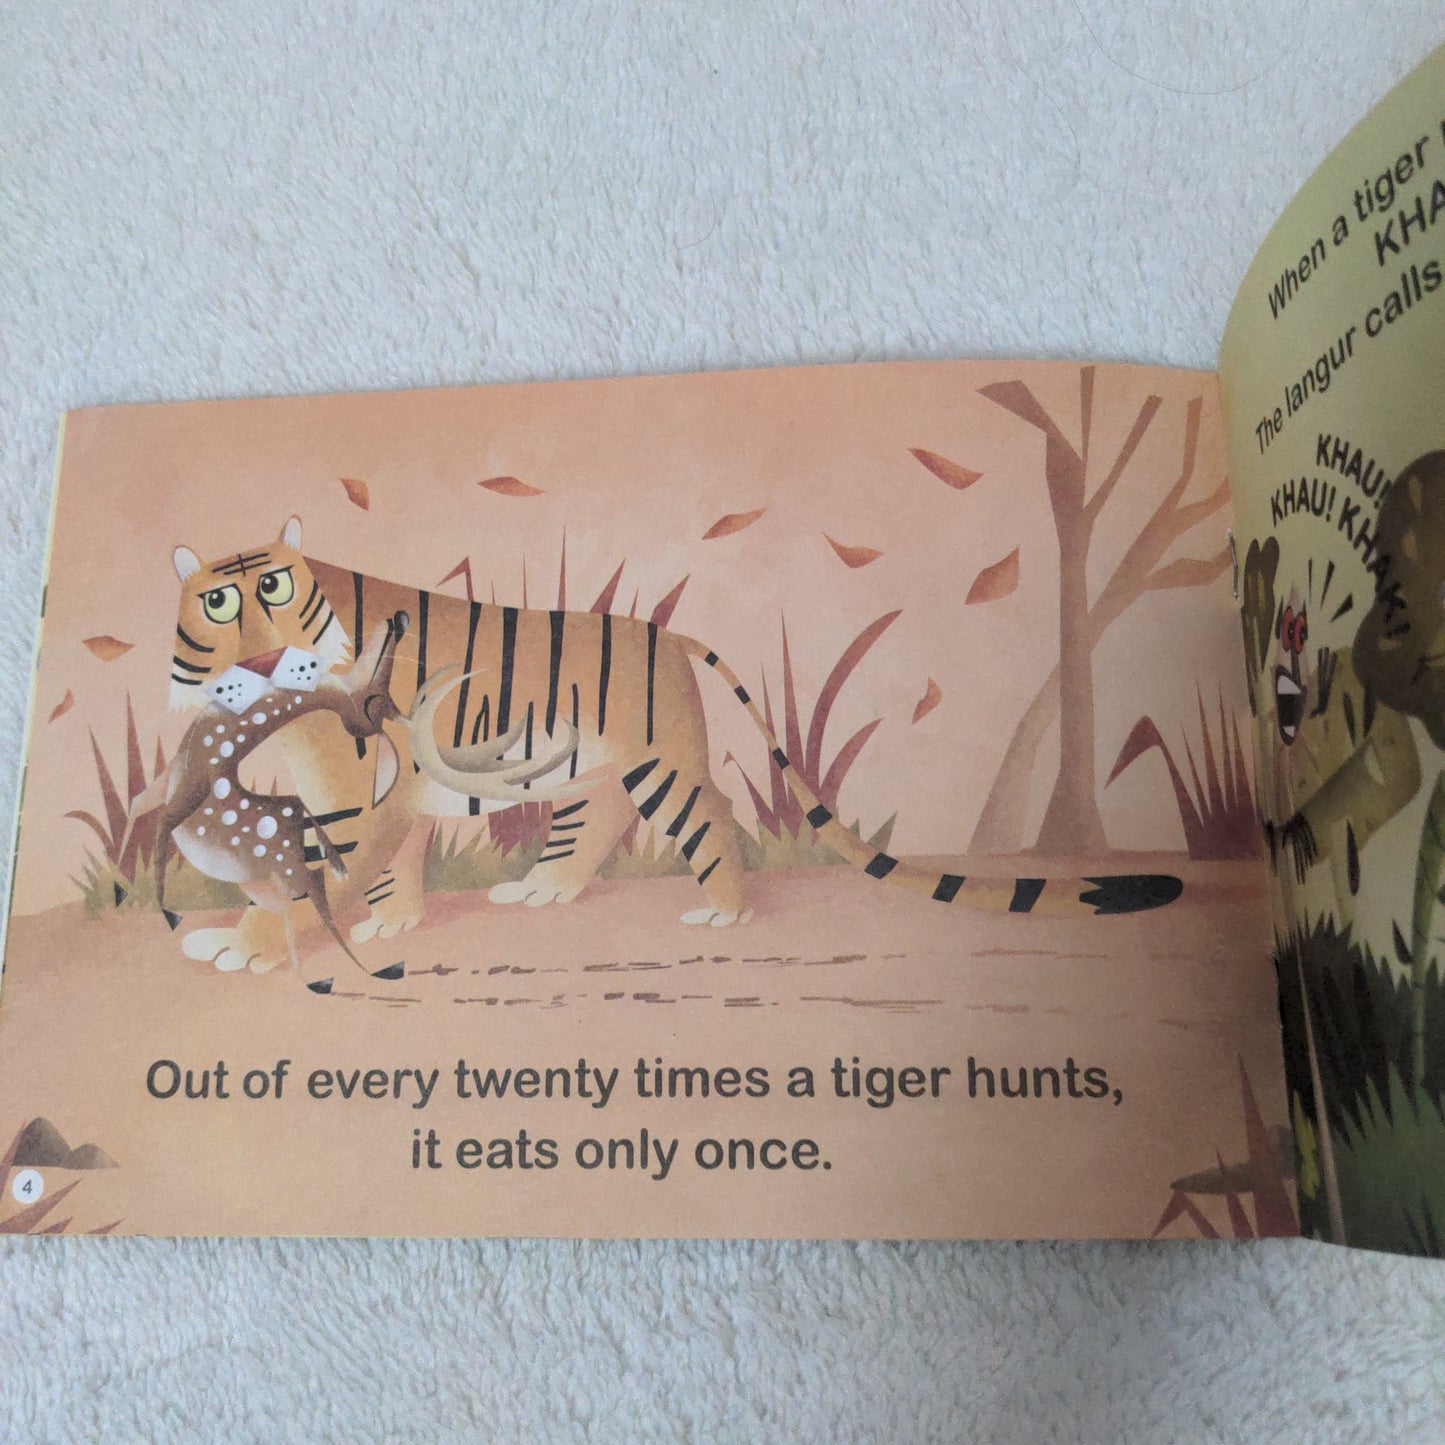 Watch Out! The Tiger Is Here! - Pratham English